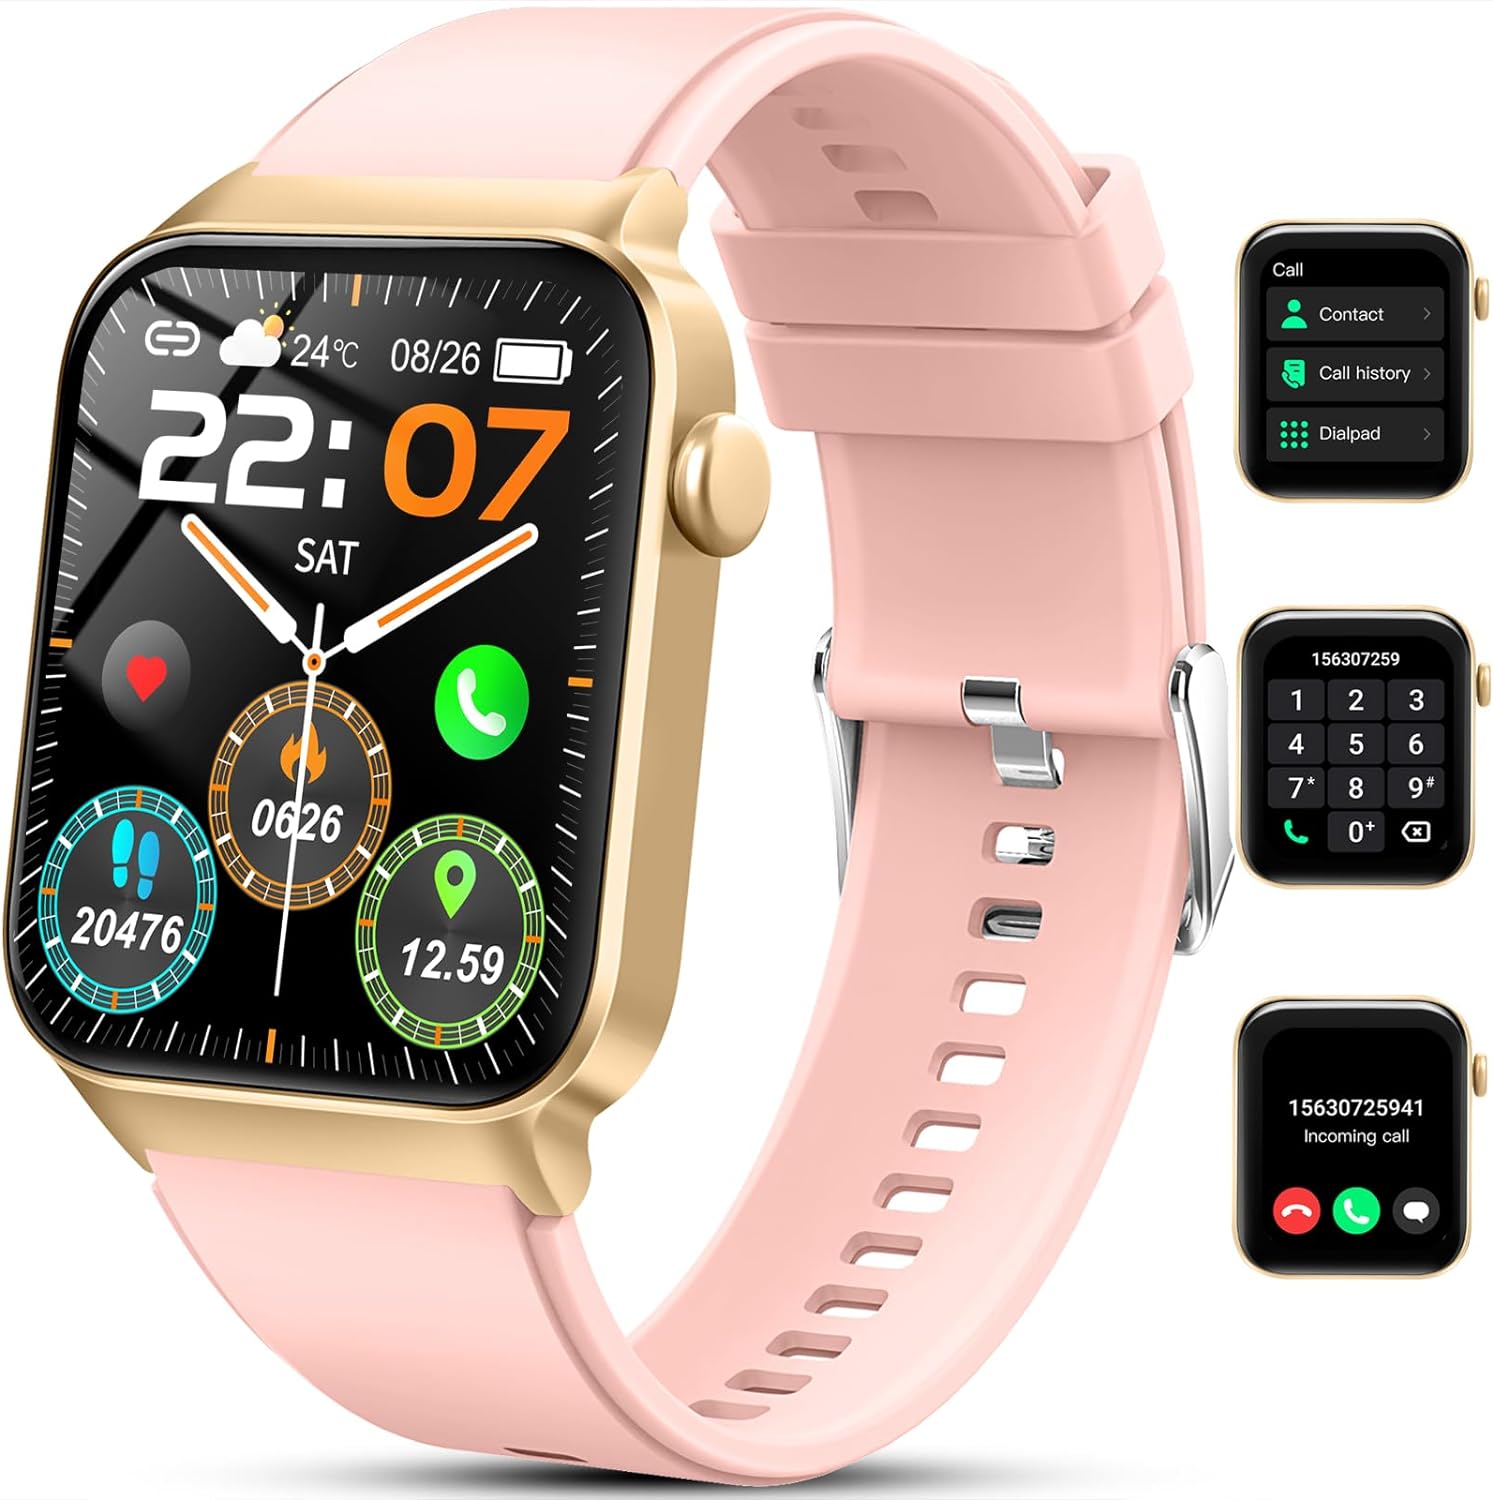 Womens Smartwatch with Phone Function 1.85 Inch Full Touch Smart Watch Fitness Watch with 113 Sports Modes, Pedometer Sleep Monitor Heart Rate Monitor IP68 Waterproof Watch Sports Watch Stopwatch for